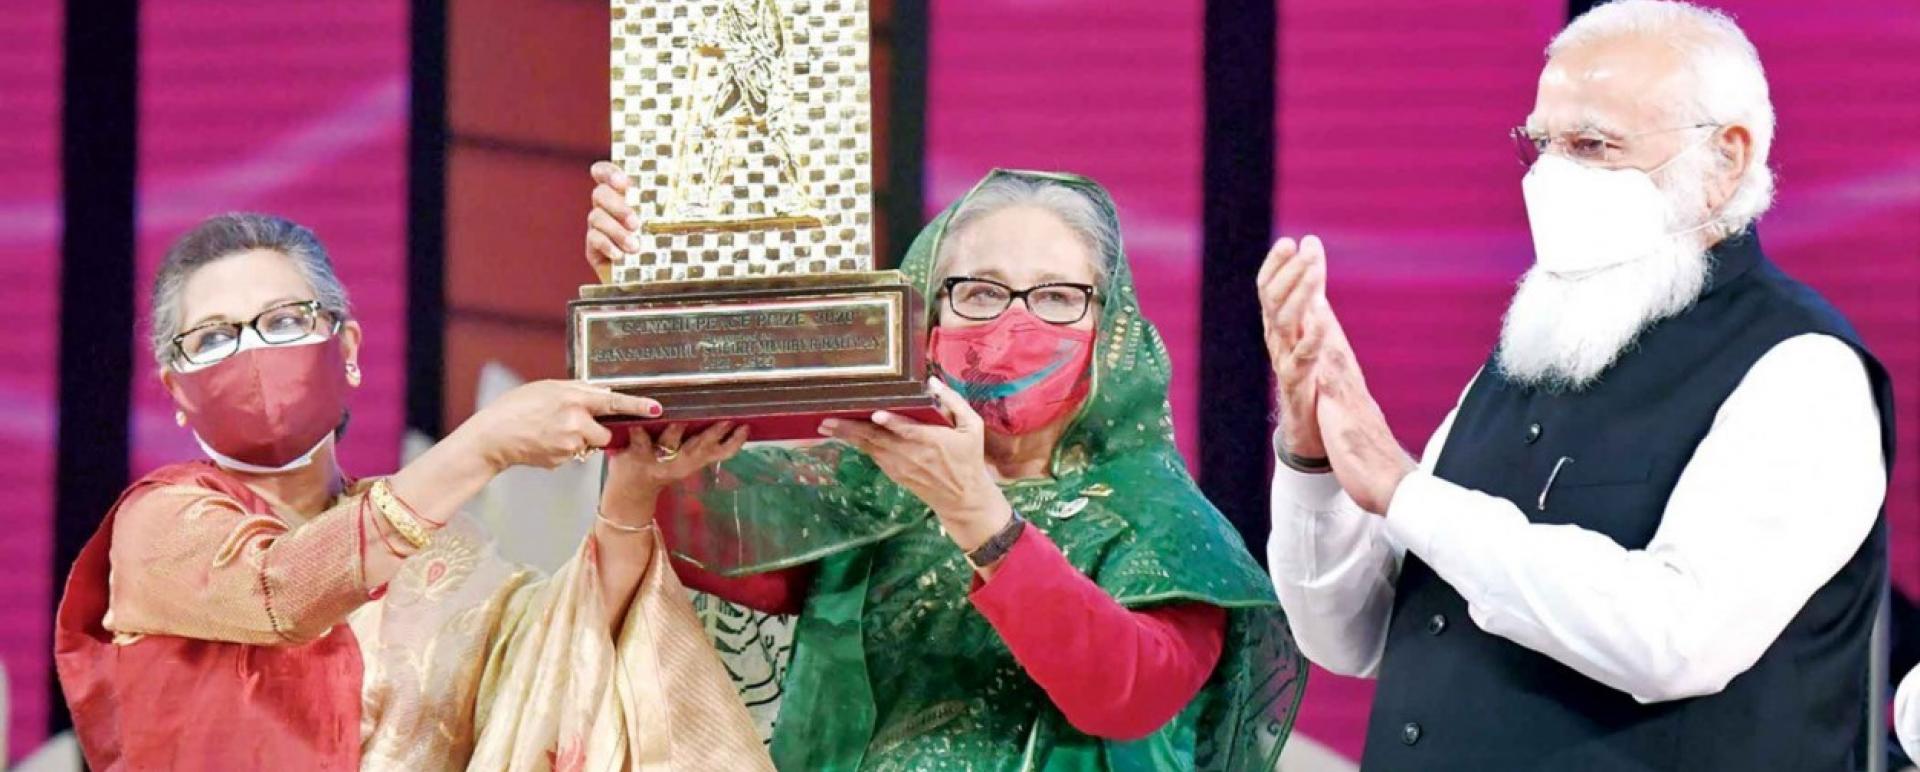 Prime Minister Sheikh Hasina and her younger sister Sheikh Rehana hold high the Gandhi Peace Prize-2020 awarded to Bangabandhu Sheikh Mujibur Rahman posthumously by the Indian government. Indian Prime Minister Narendra Modi is seen applauding next to them. Photo: PID